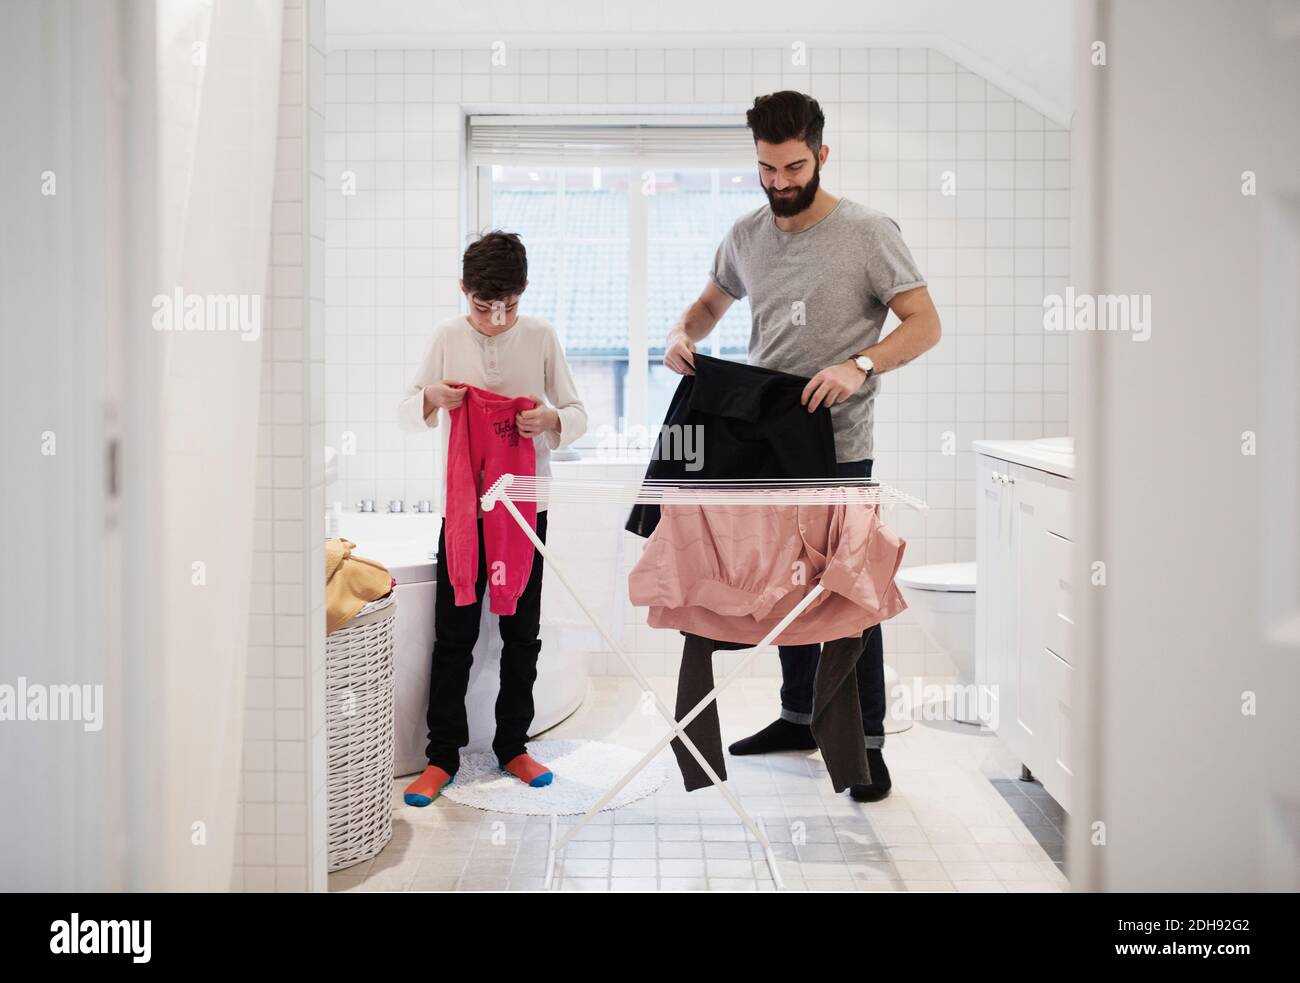 Son and father drying clothes on rack at home Stock Photo